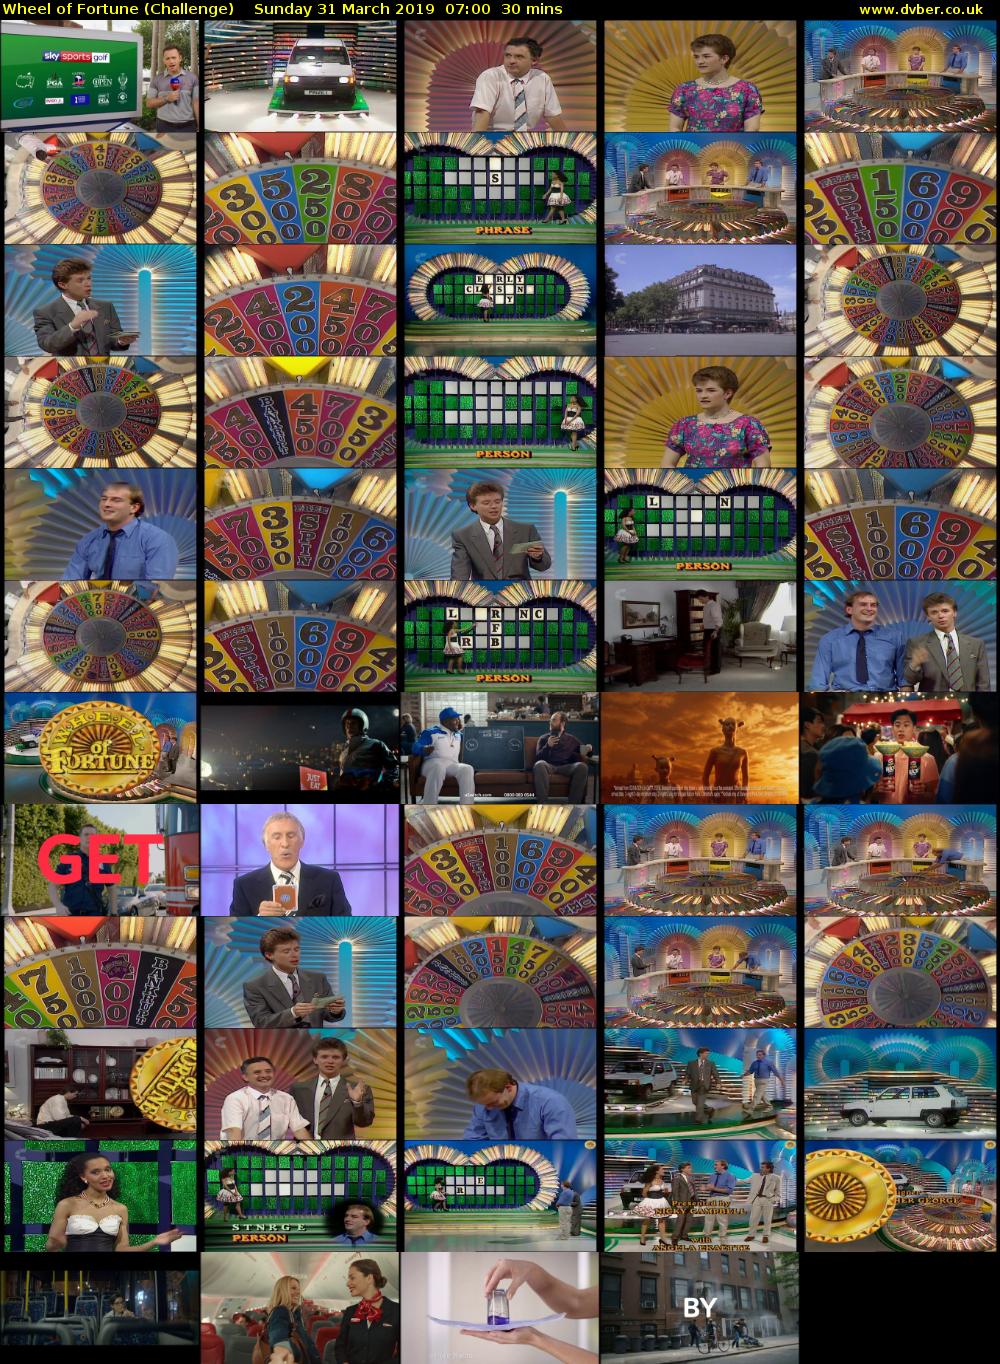 Wheel of Fortune (Challenge) Sunday 31 March 2019 07:00 - 07:30